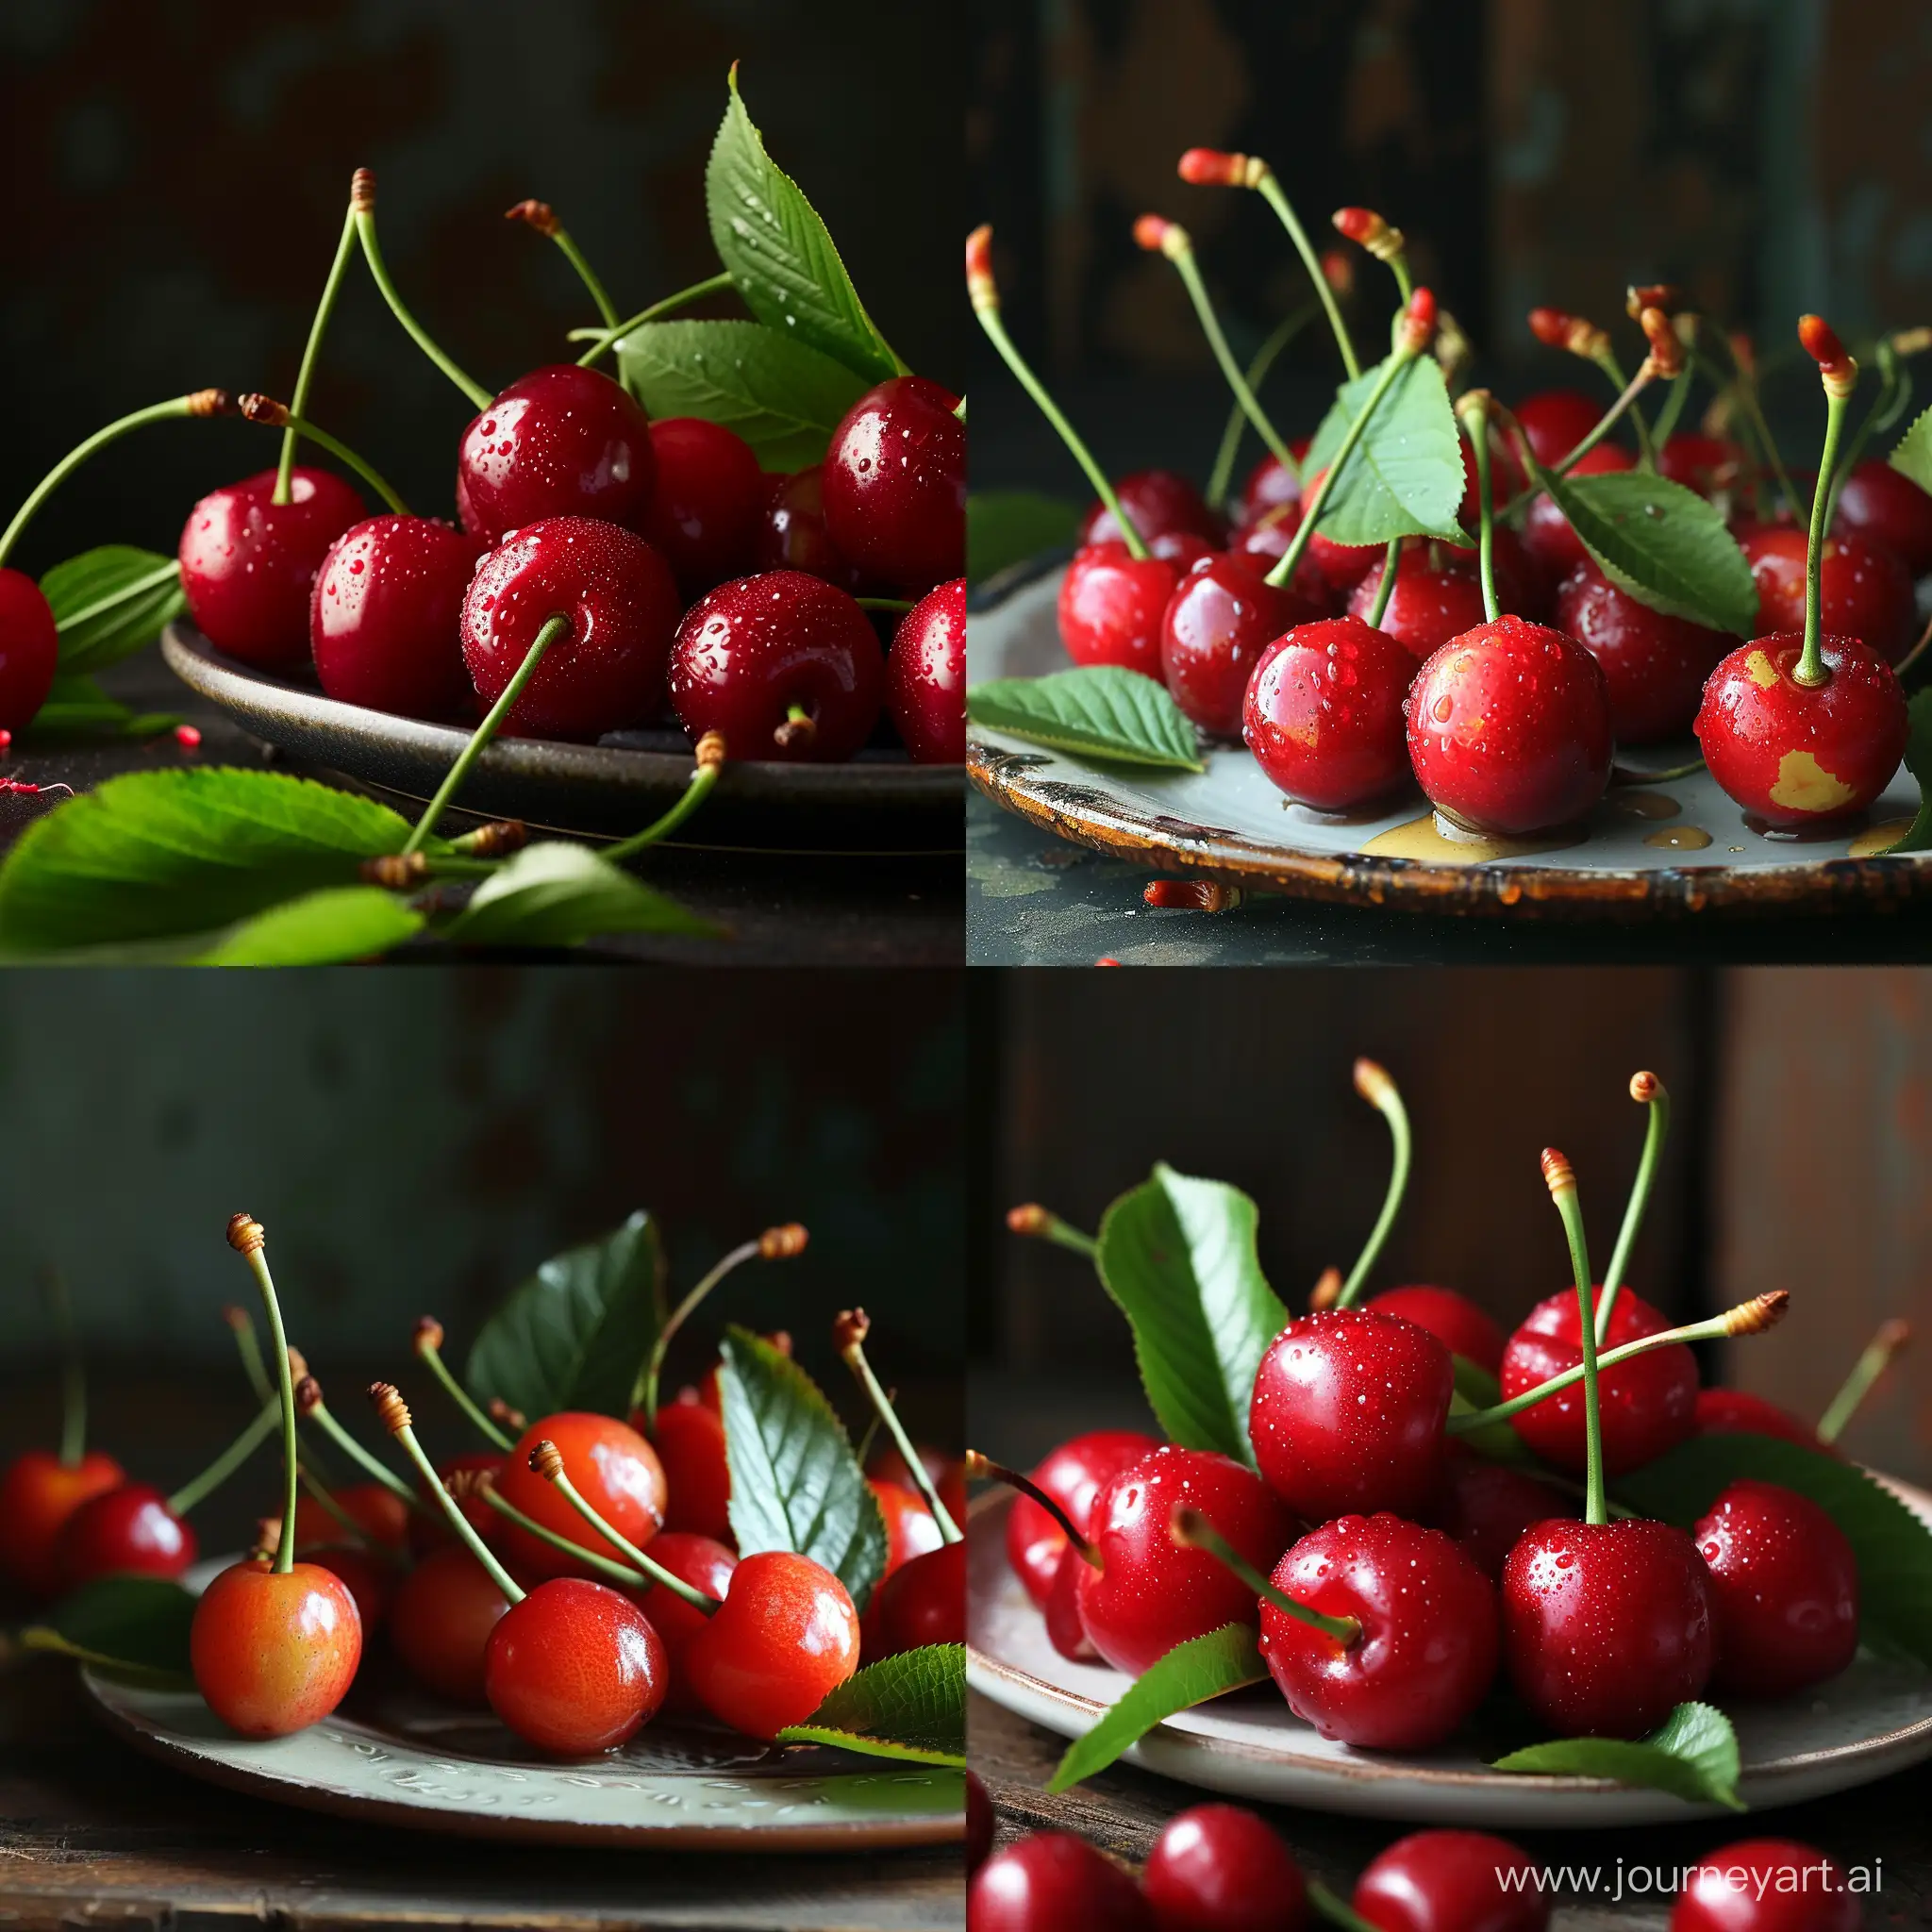 Fresh-Cherries-with-Leaves-on-a-Plate-Vibrant-Side-View-Display